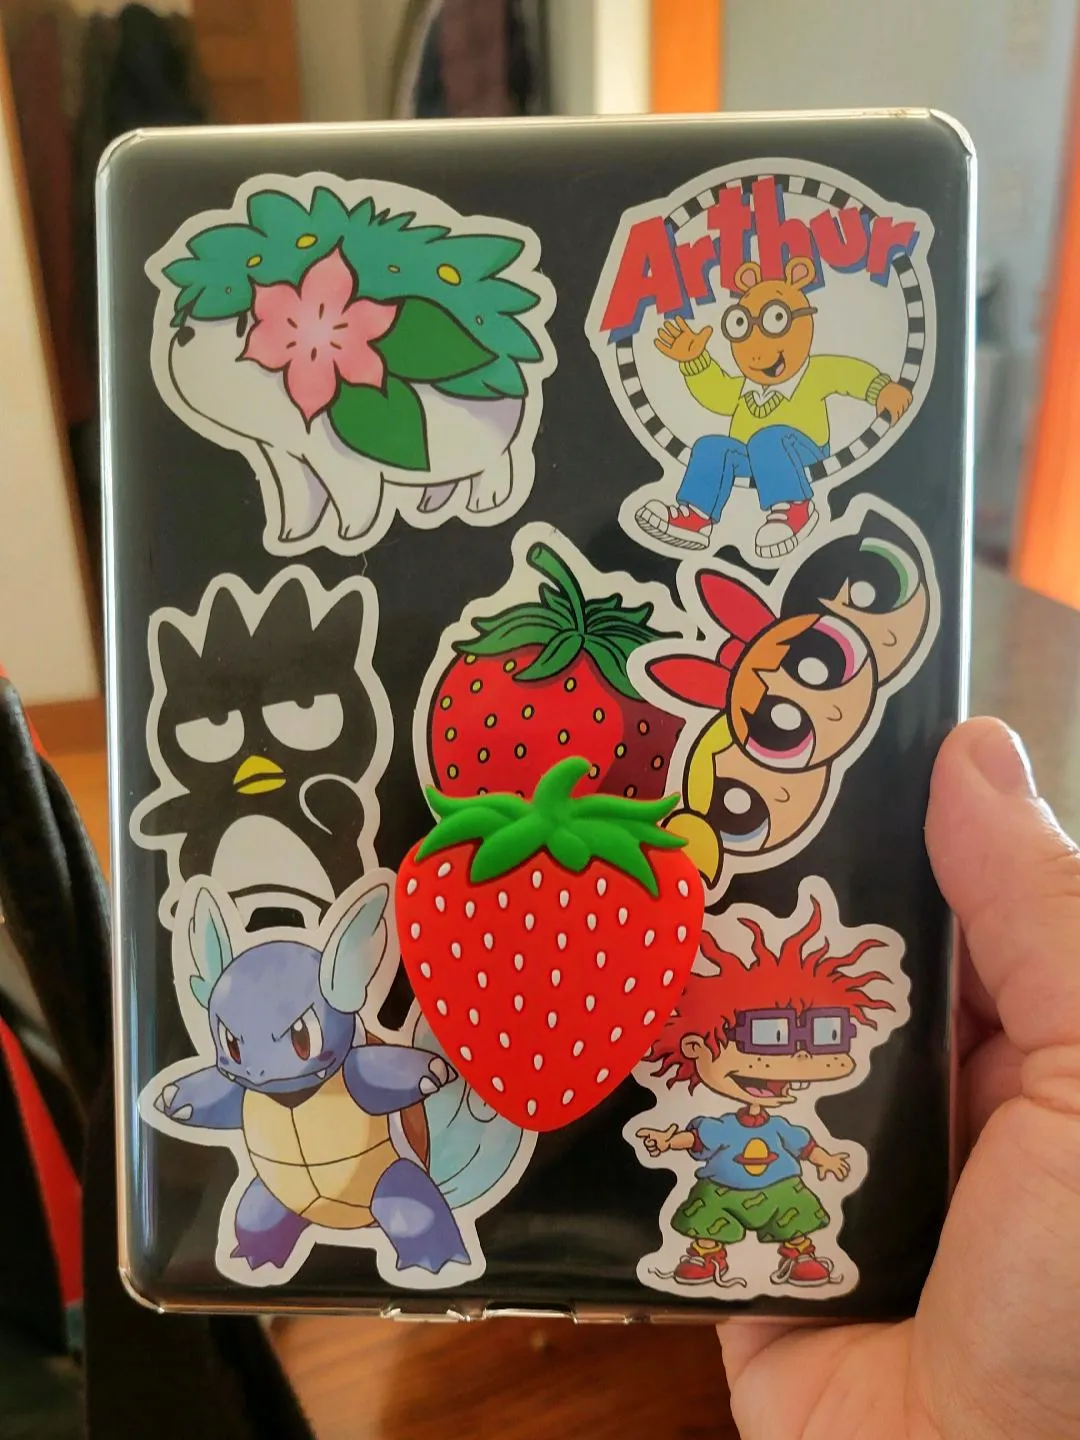 ♥ Personalising my new Kindle ♥